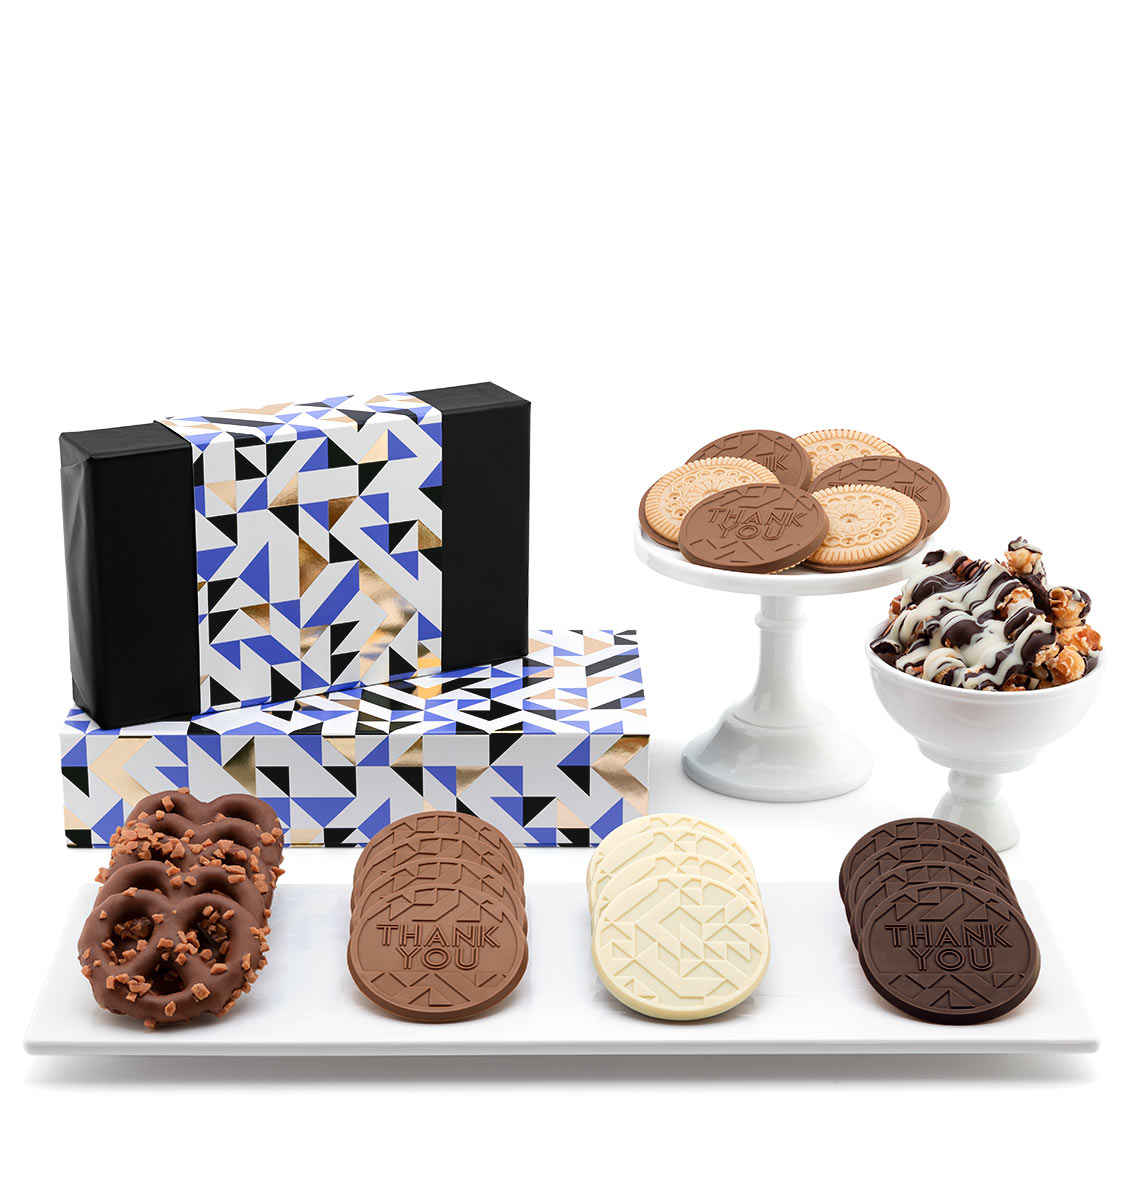 ready-gift-chocolate-SHX230715T-thank-you-luxury-tasting-box-2-piece-gift-tower